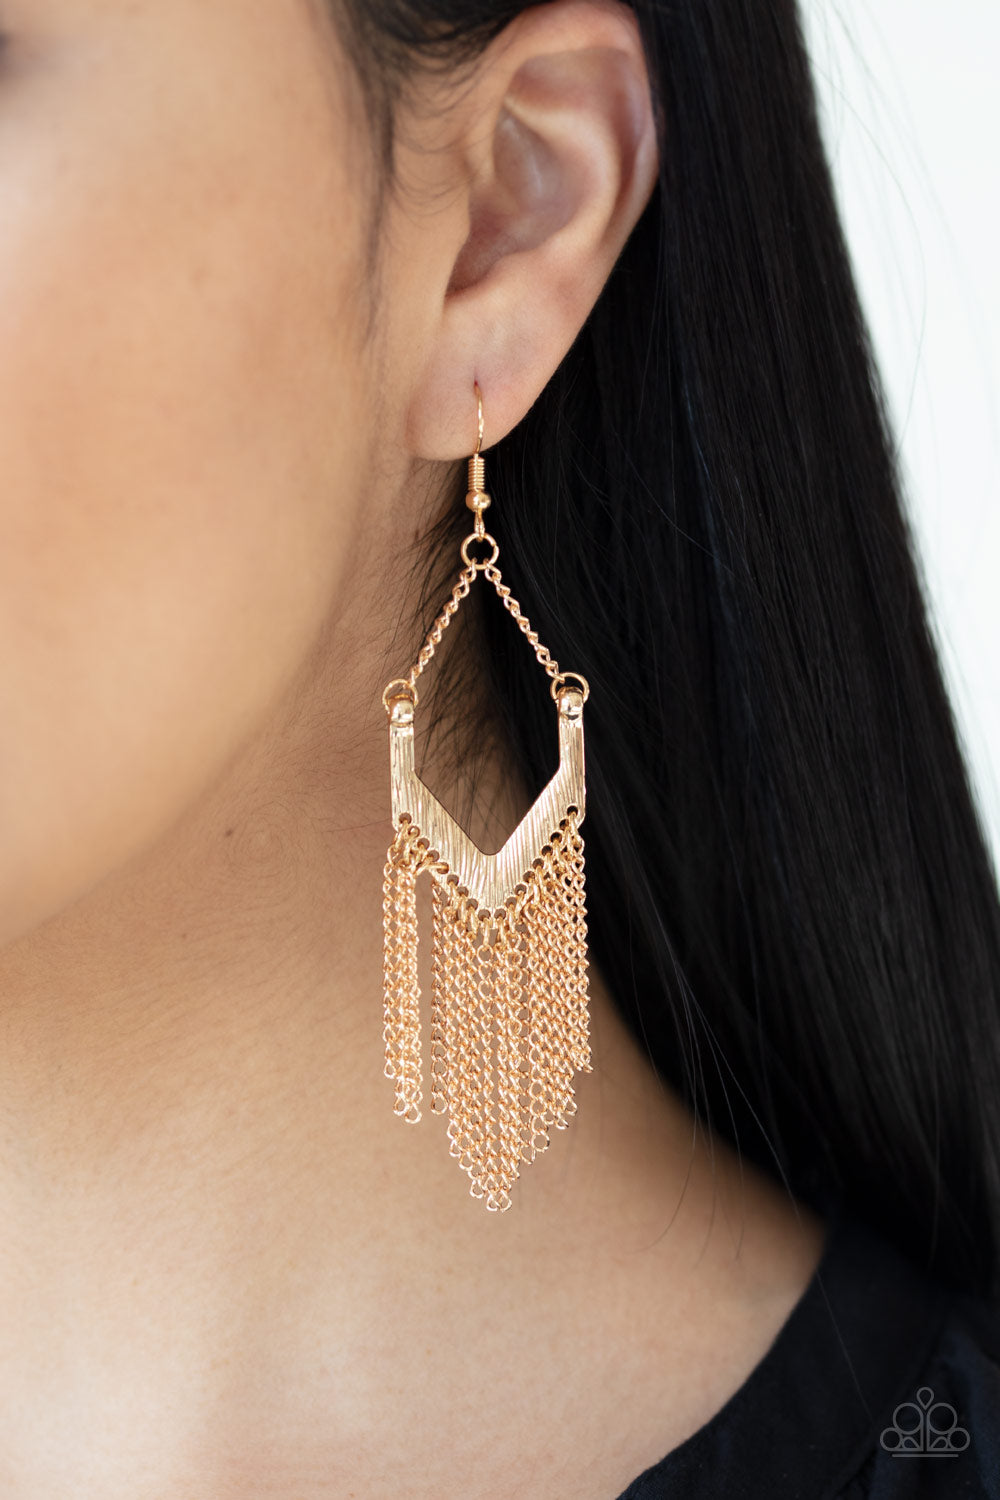 Unchained Fashion - Gold Chevron, Chain Earrings - Paparazzi Accessories - All That Sparkles Xoxo 